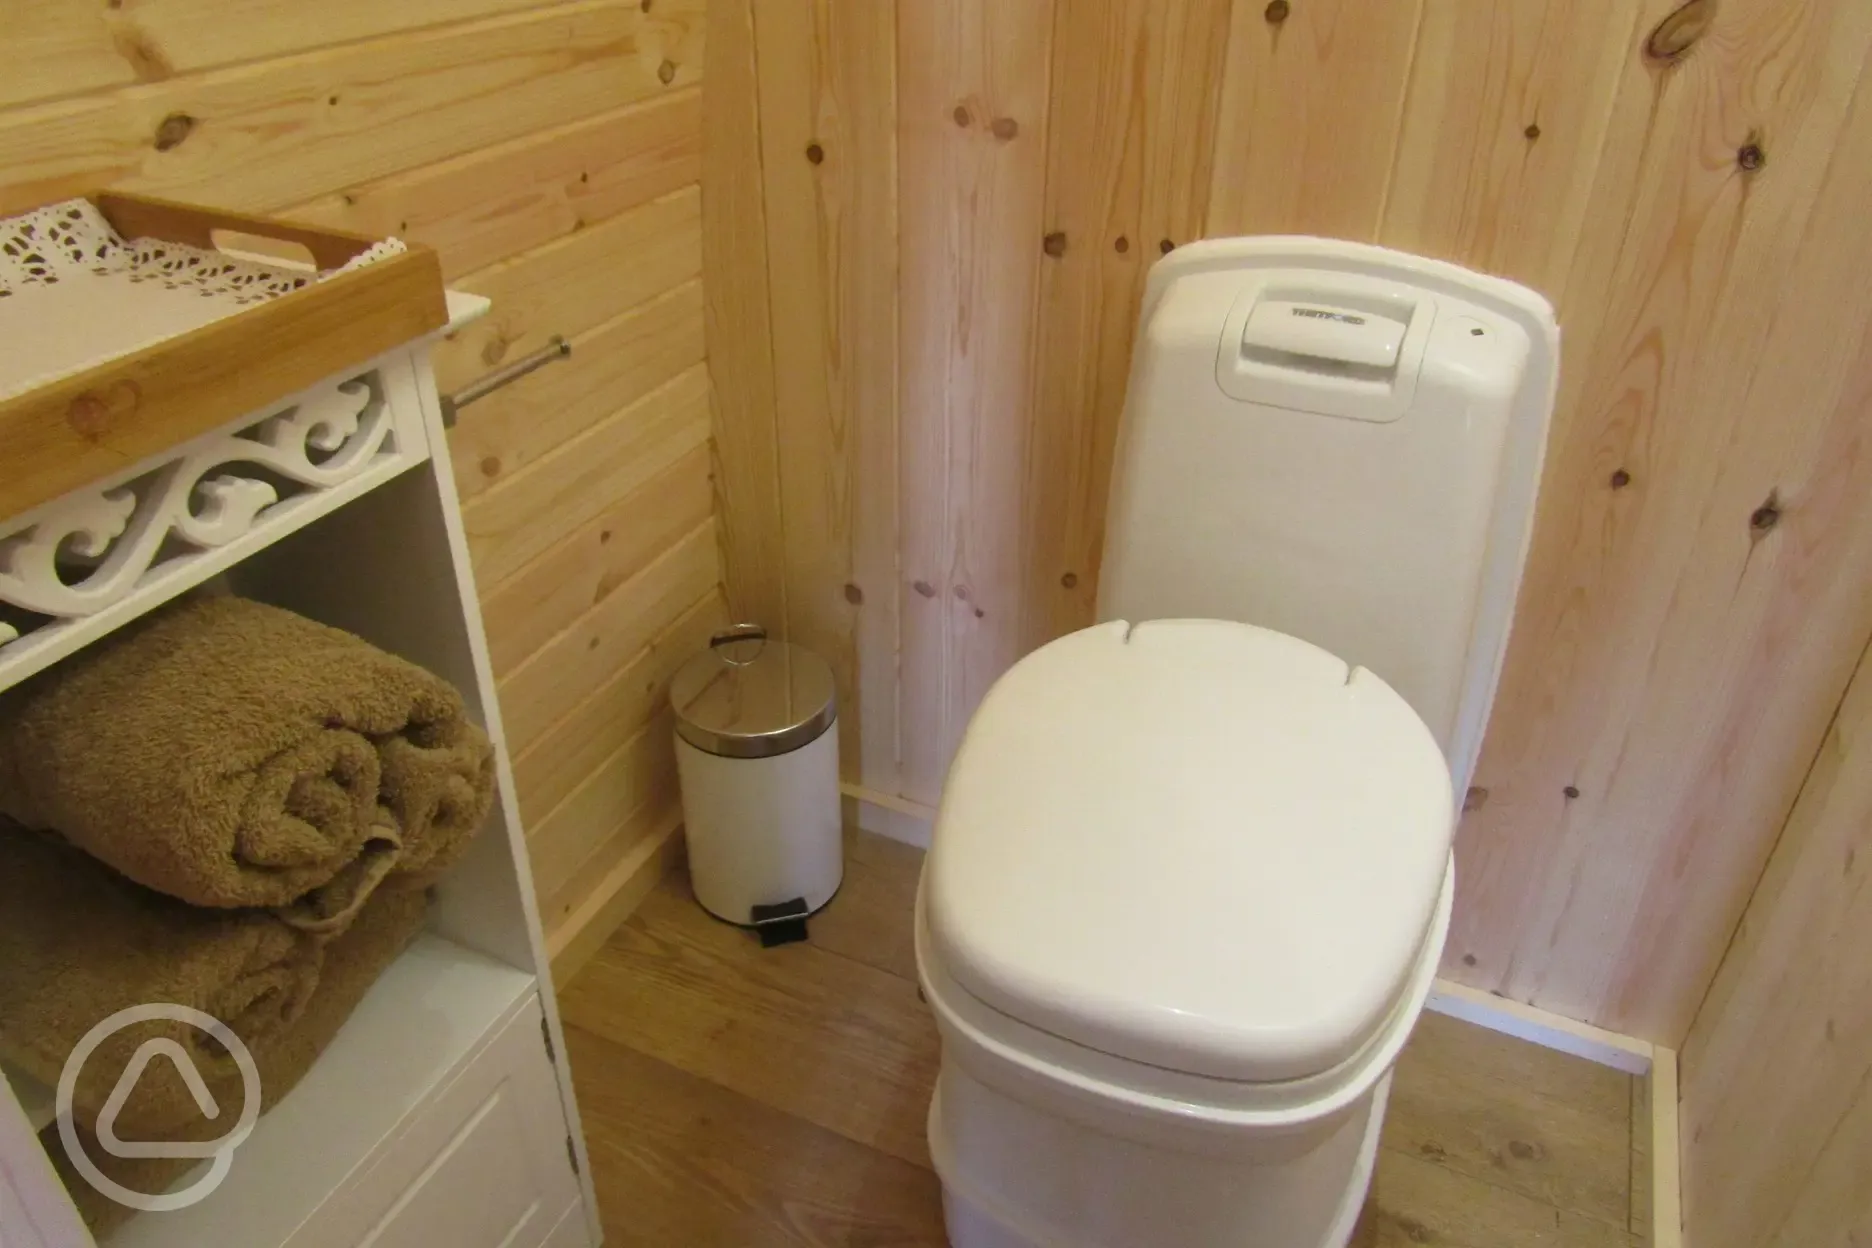 The Pods even have there very own toilet facilities inside